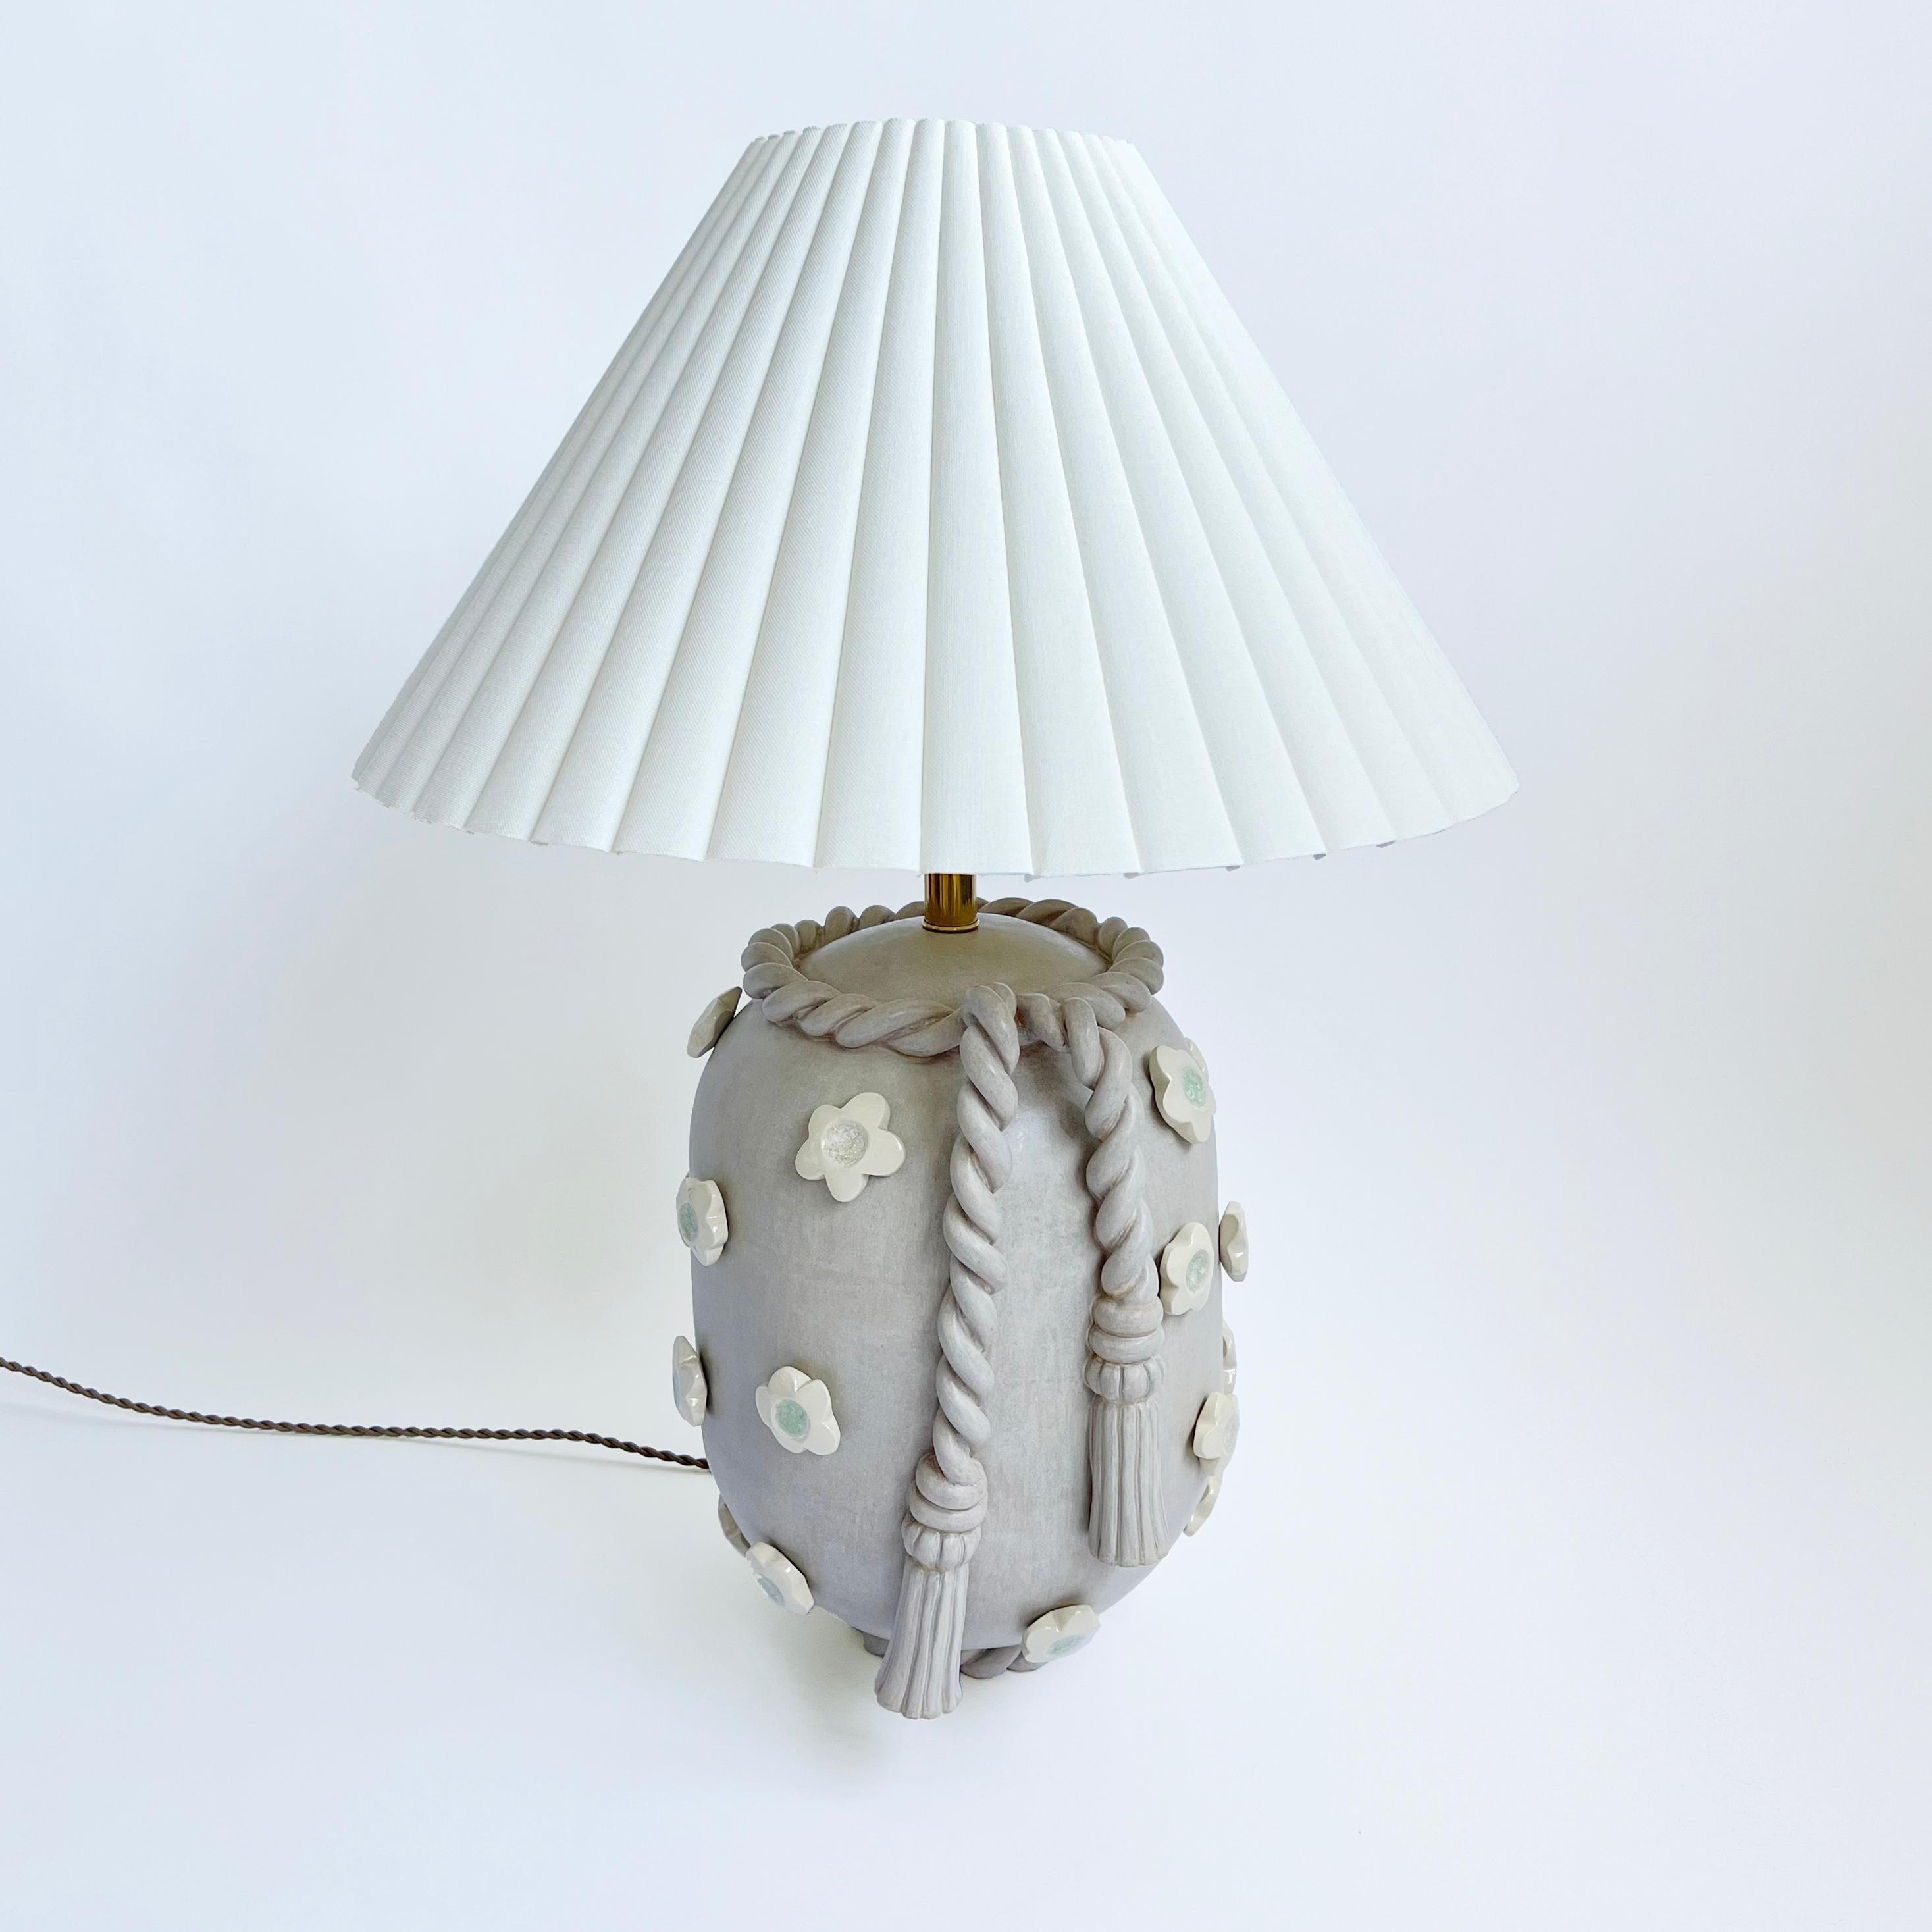 Inspired by architectural details from southern Spain, this ceramic stoneware lamp features hand-sculpted trompe l'oeil tassel detail and hand-carved white stoneware applique flowers inlayed with glass. Finished in light gray satin glaze with brass